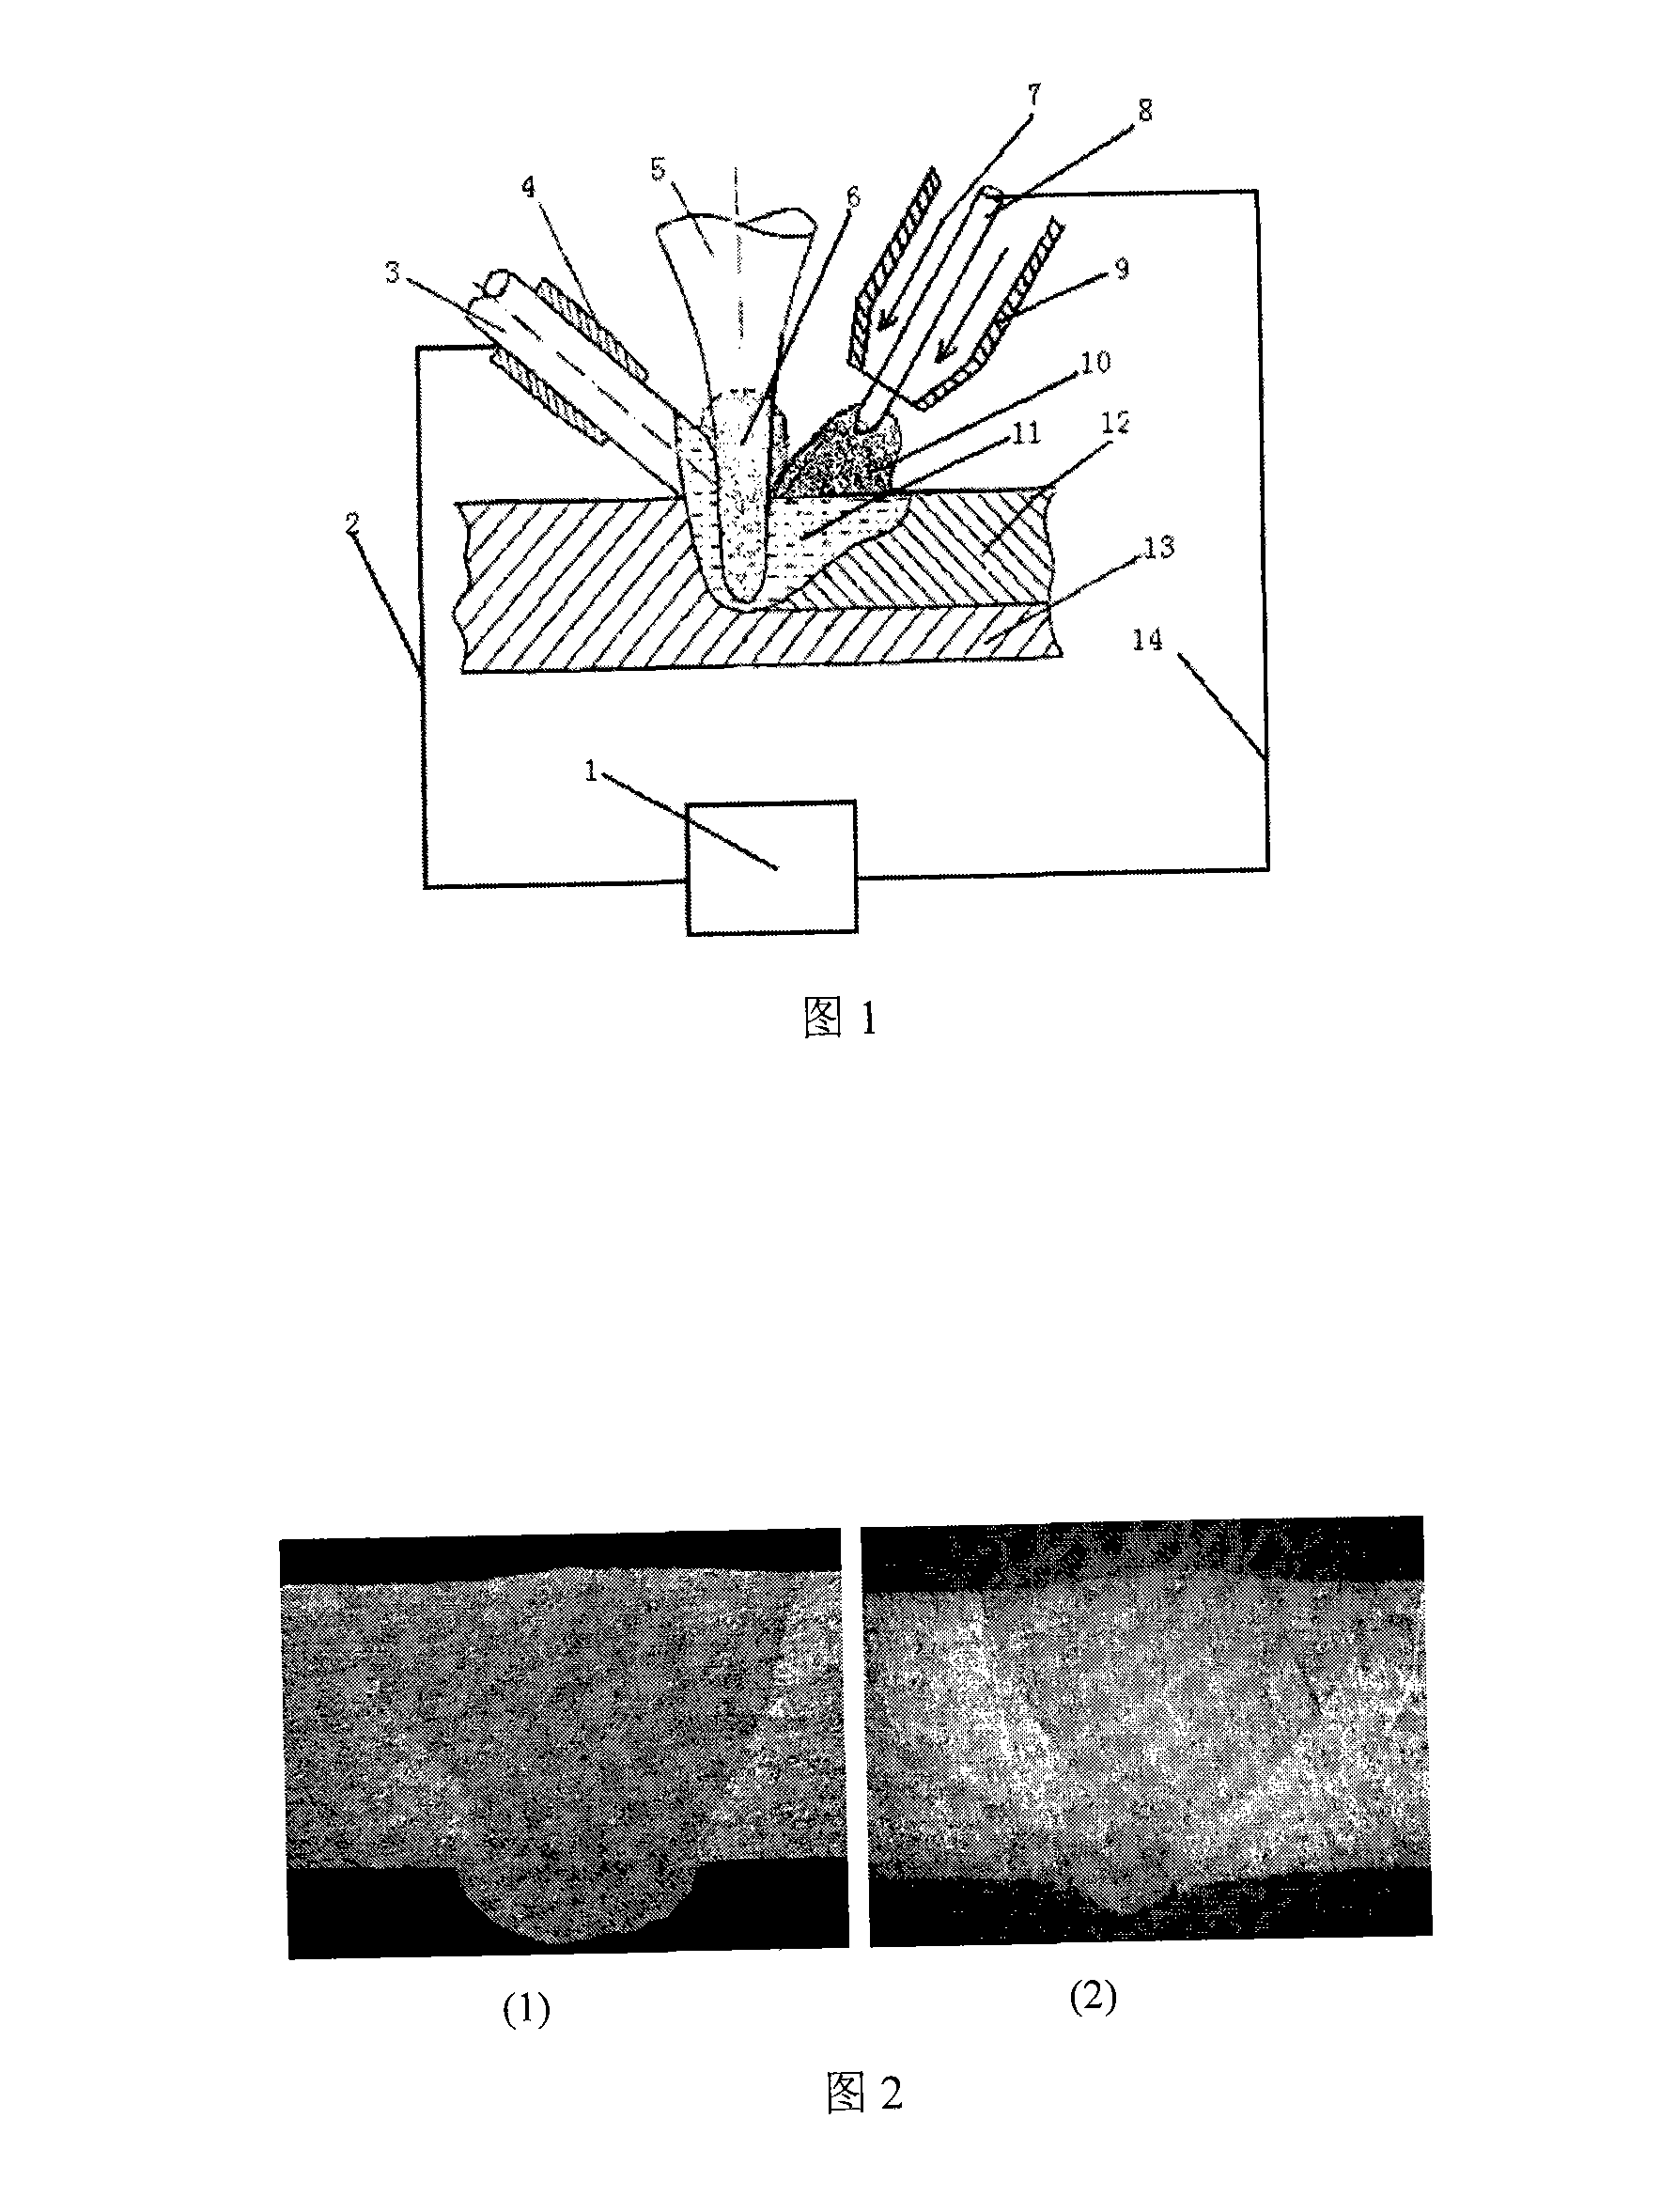 Laser electrical arc complex welding method for intensifying current magnetohydrodynamics effect